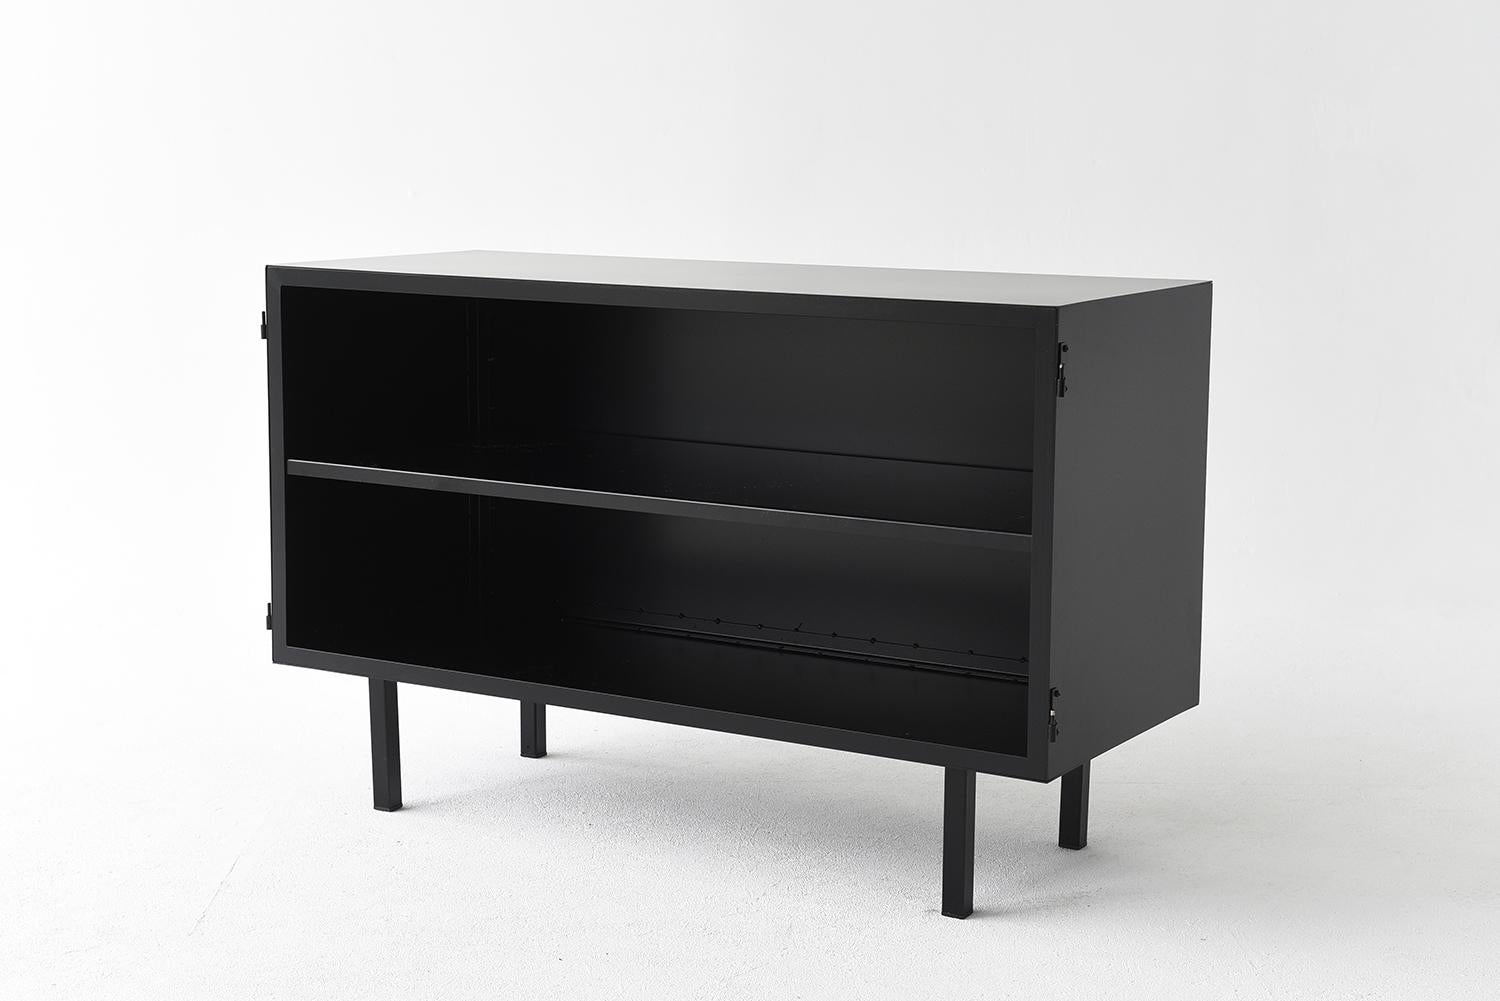 Object 002 cabinet by NG Design
Dimensions: D115 x W50 x H76 cm
Materials: Powder coated steel.

Also Available: All of objects available in different materials and colors on demand.

A powder-coated sheet steel chest of drawers with a